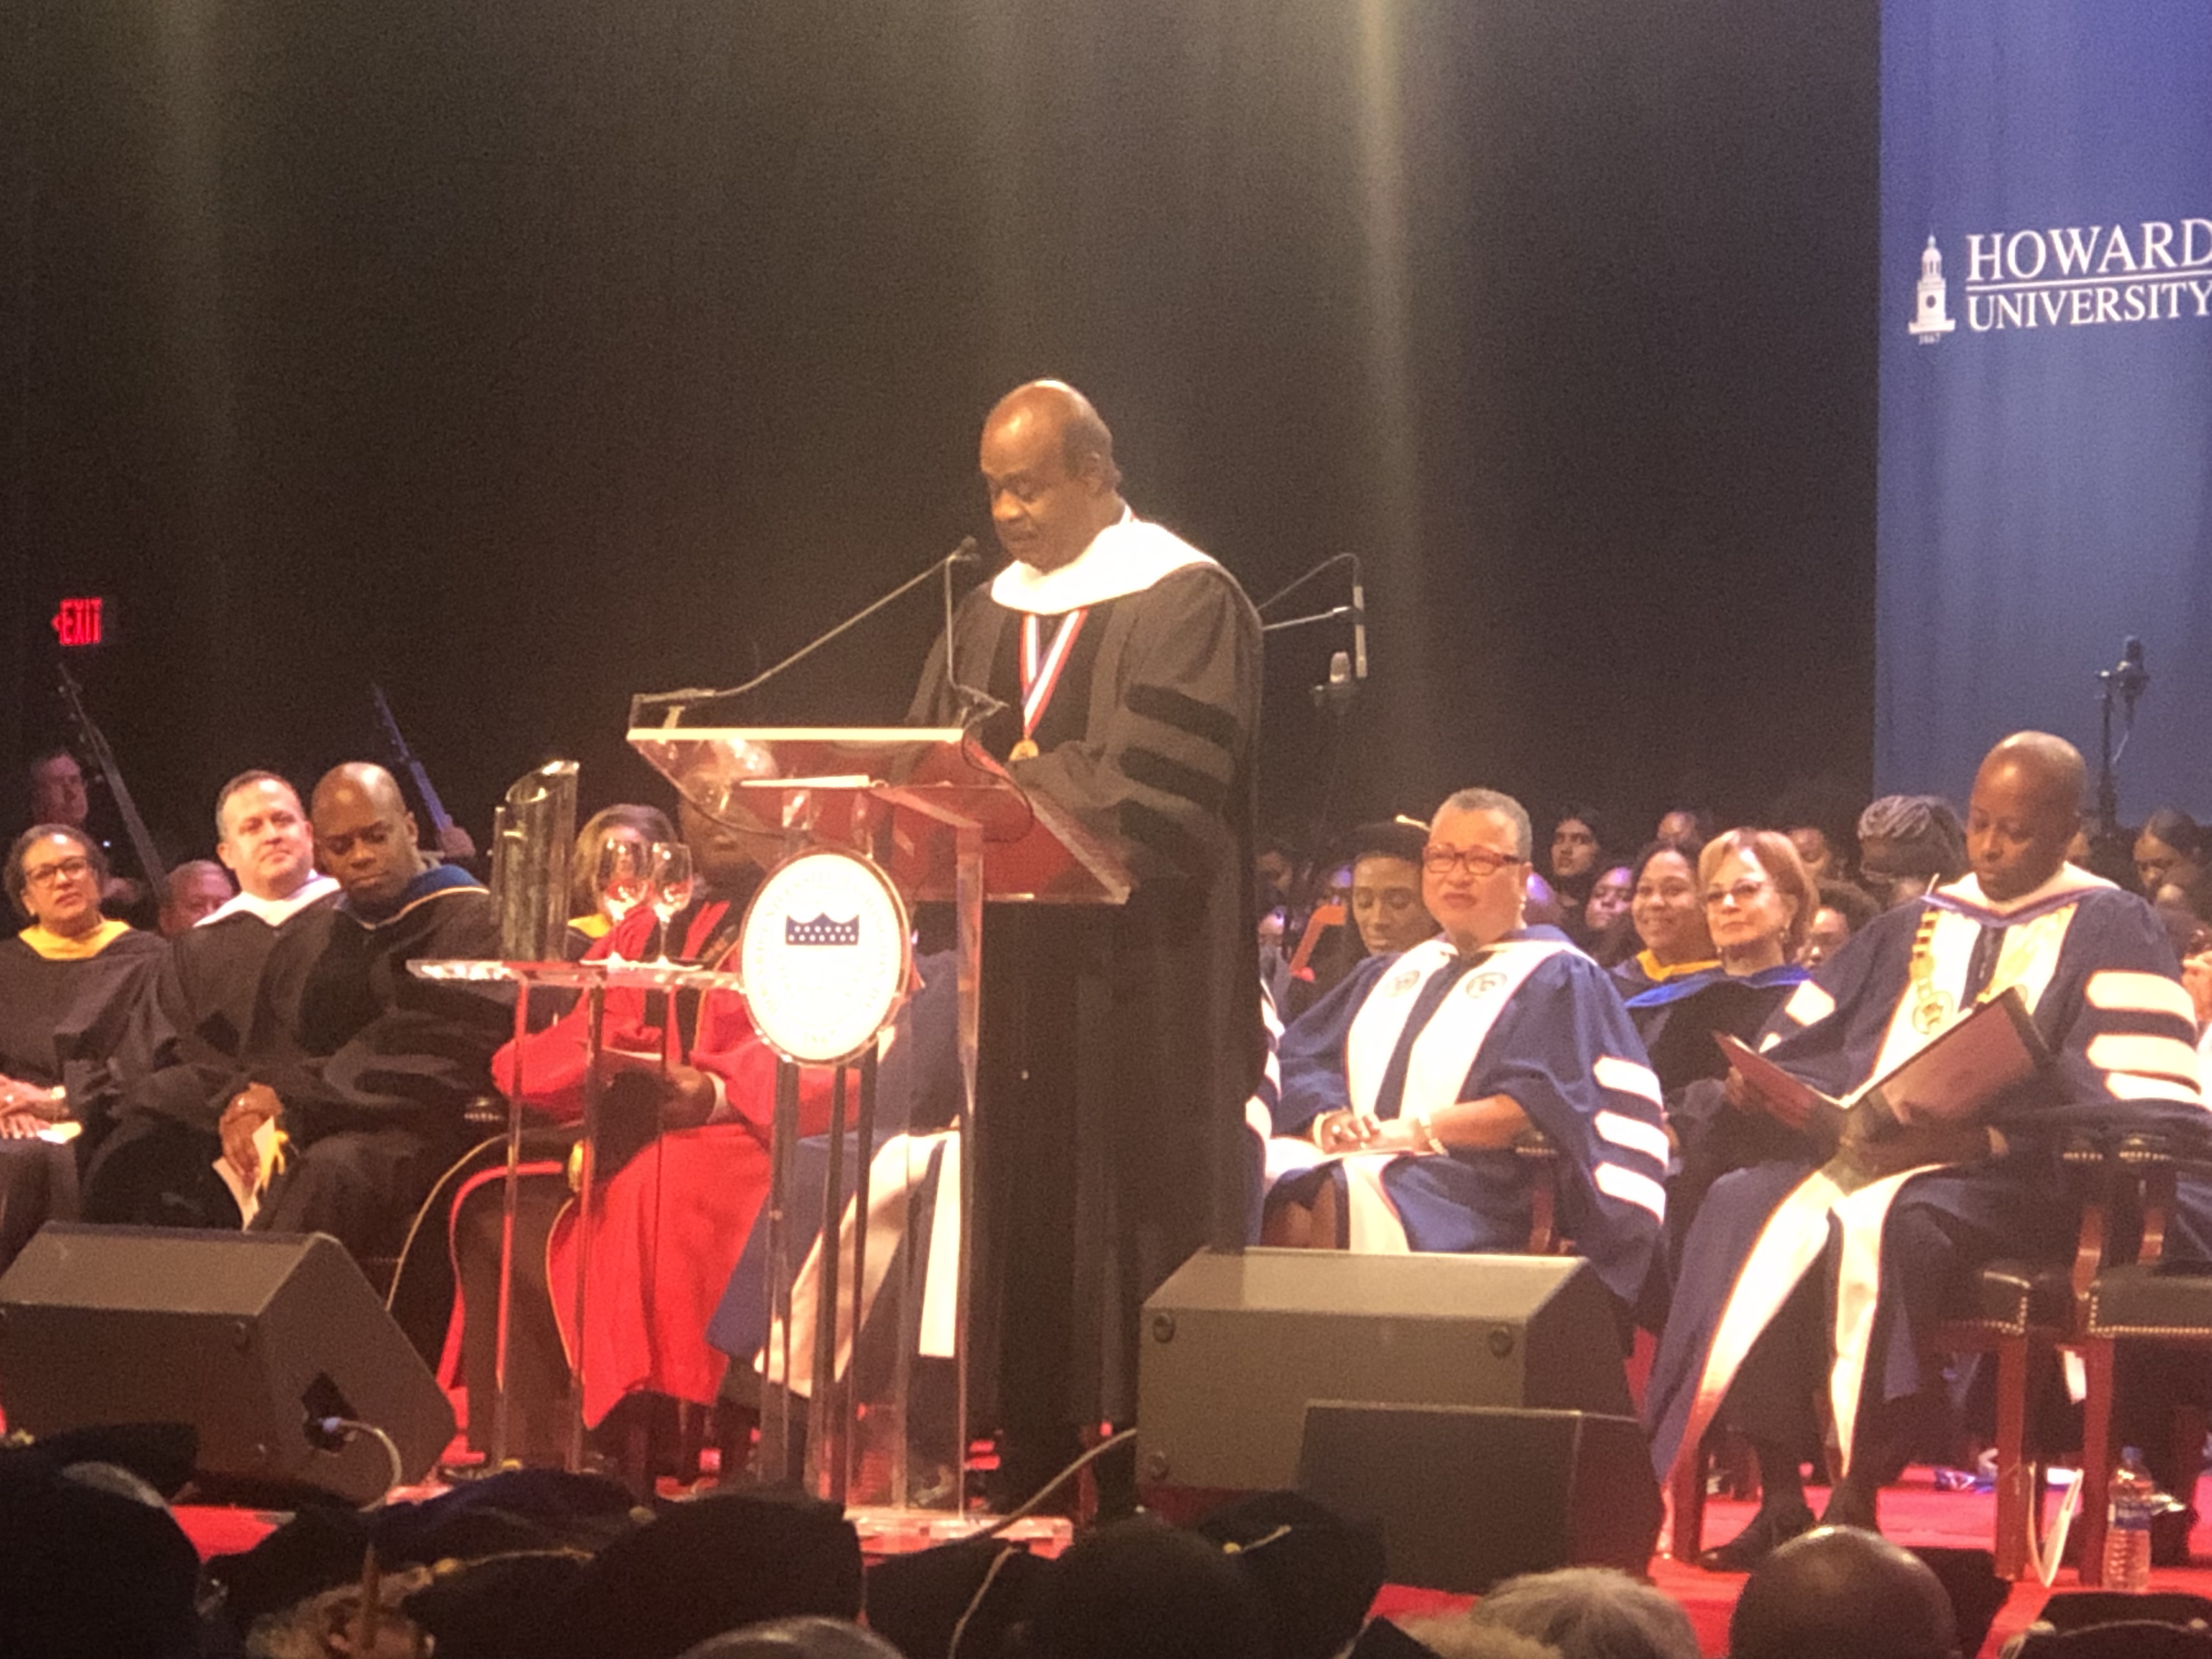 Democracy Is Worth the Struggle, Convocation Speaker Tells Howard Students